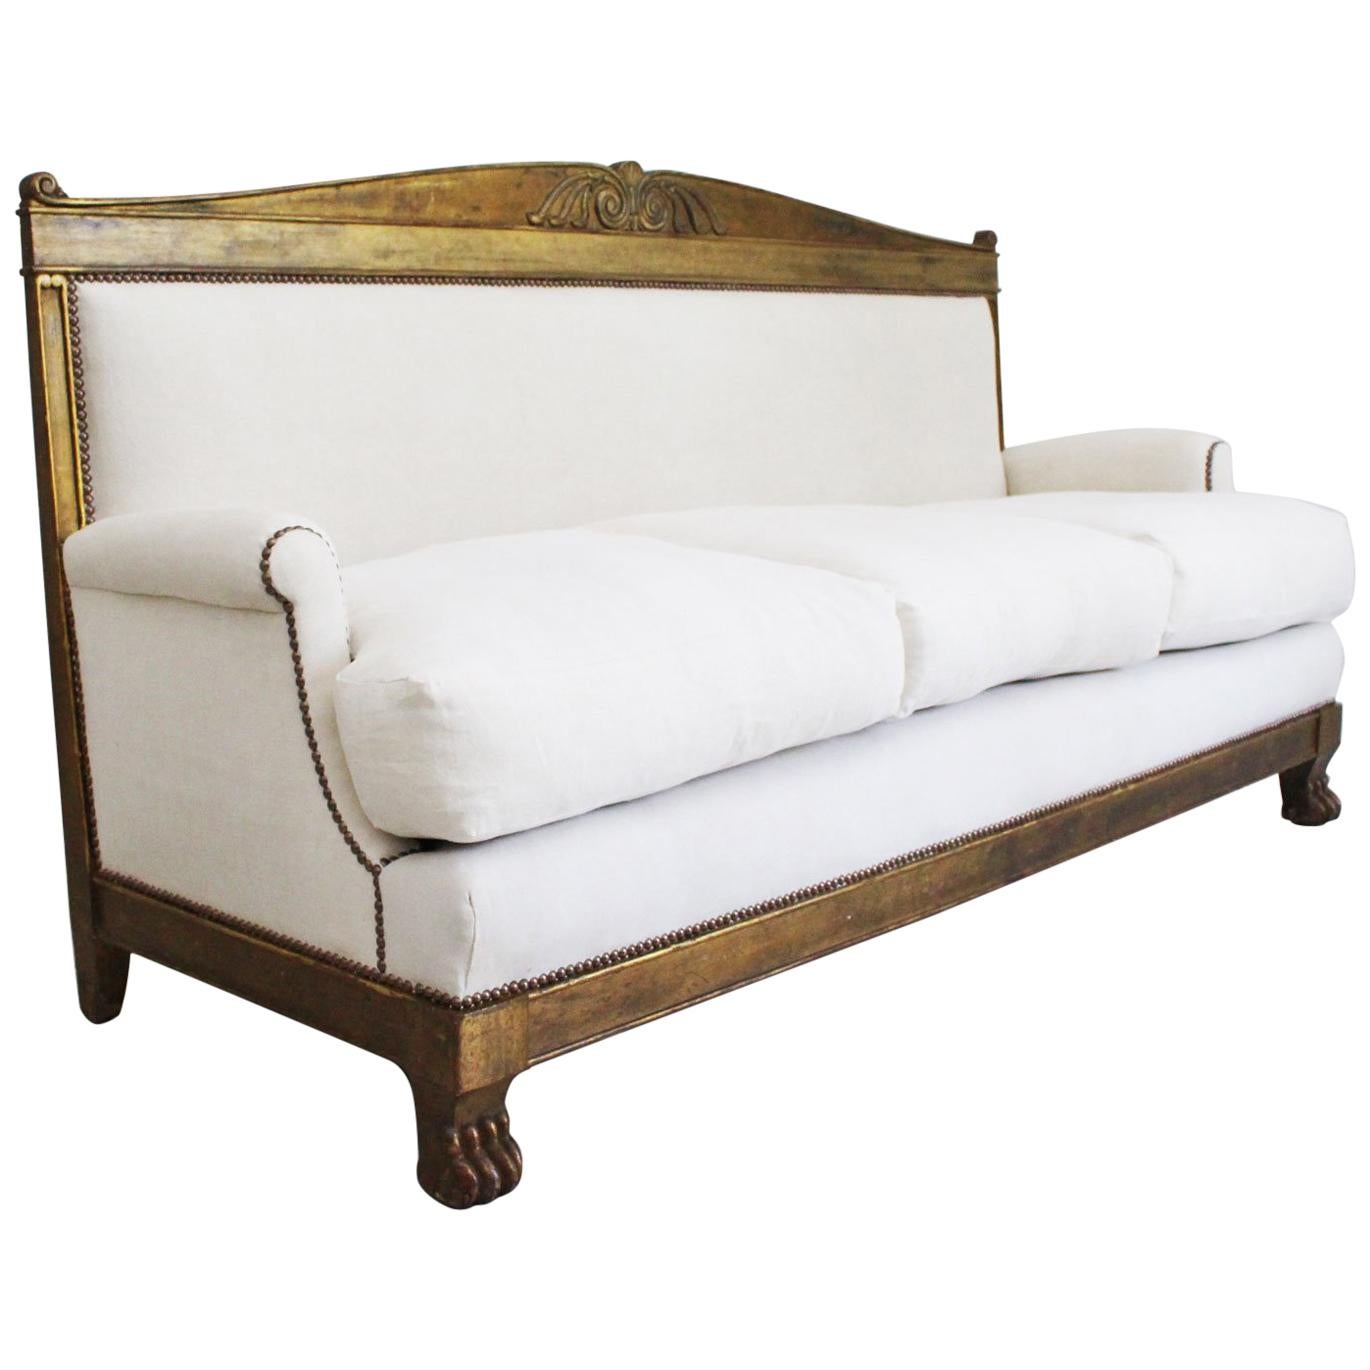 French Empire Style Late 19th Century Gilt Sofa